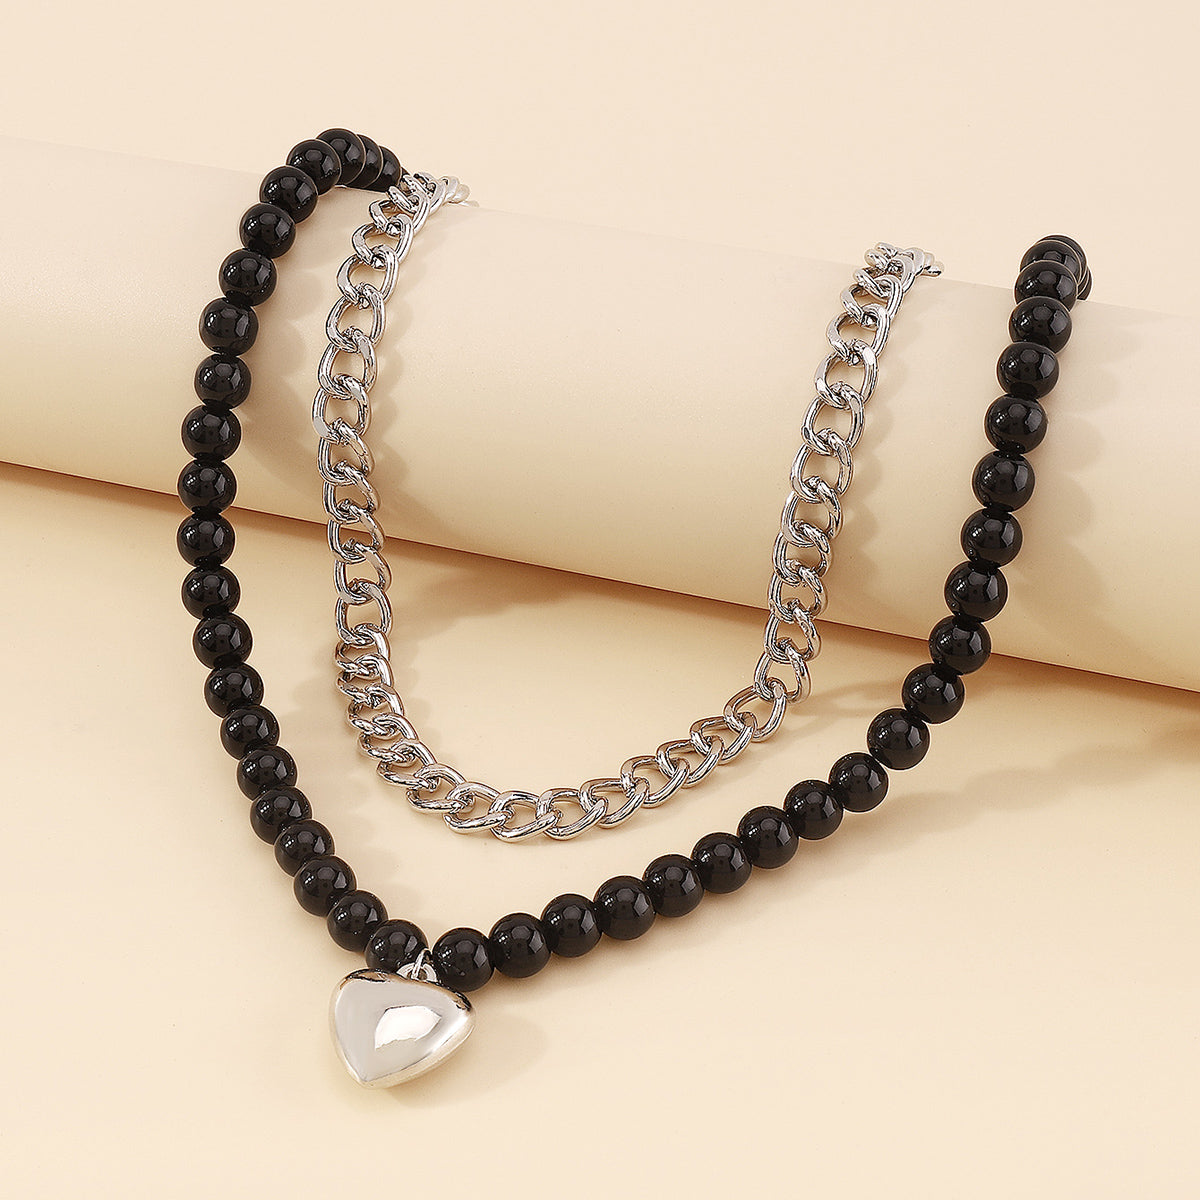 Black Beads Chain Collar Heart Pendant Necklace medyjewelry